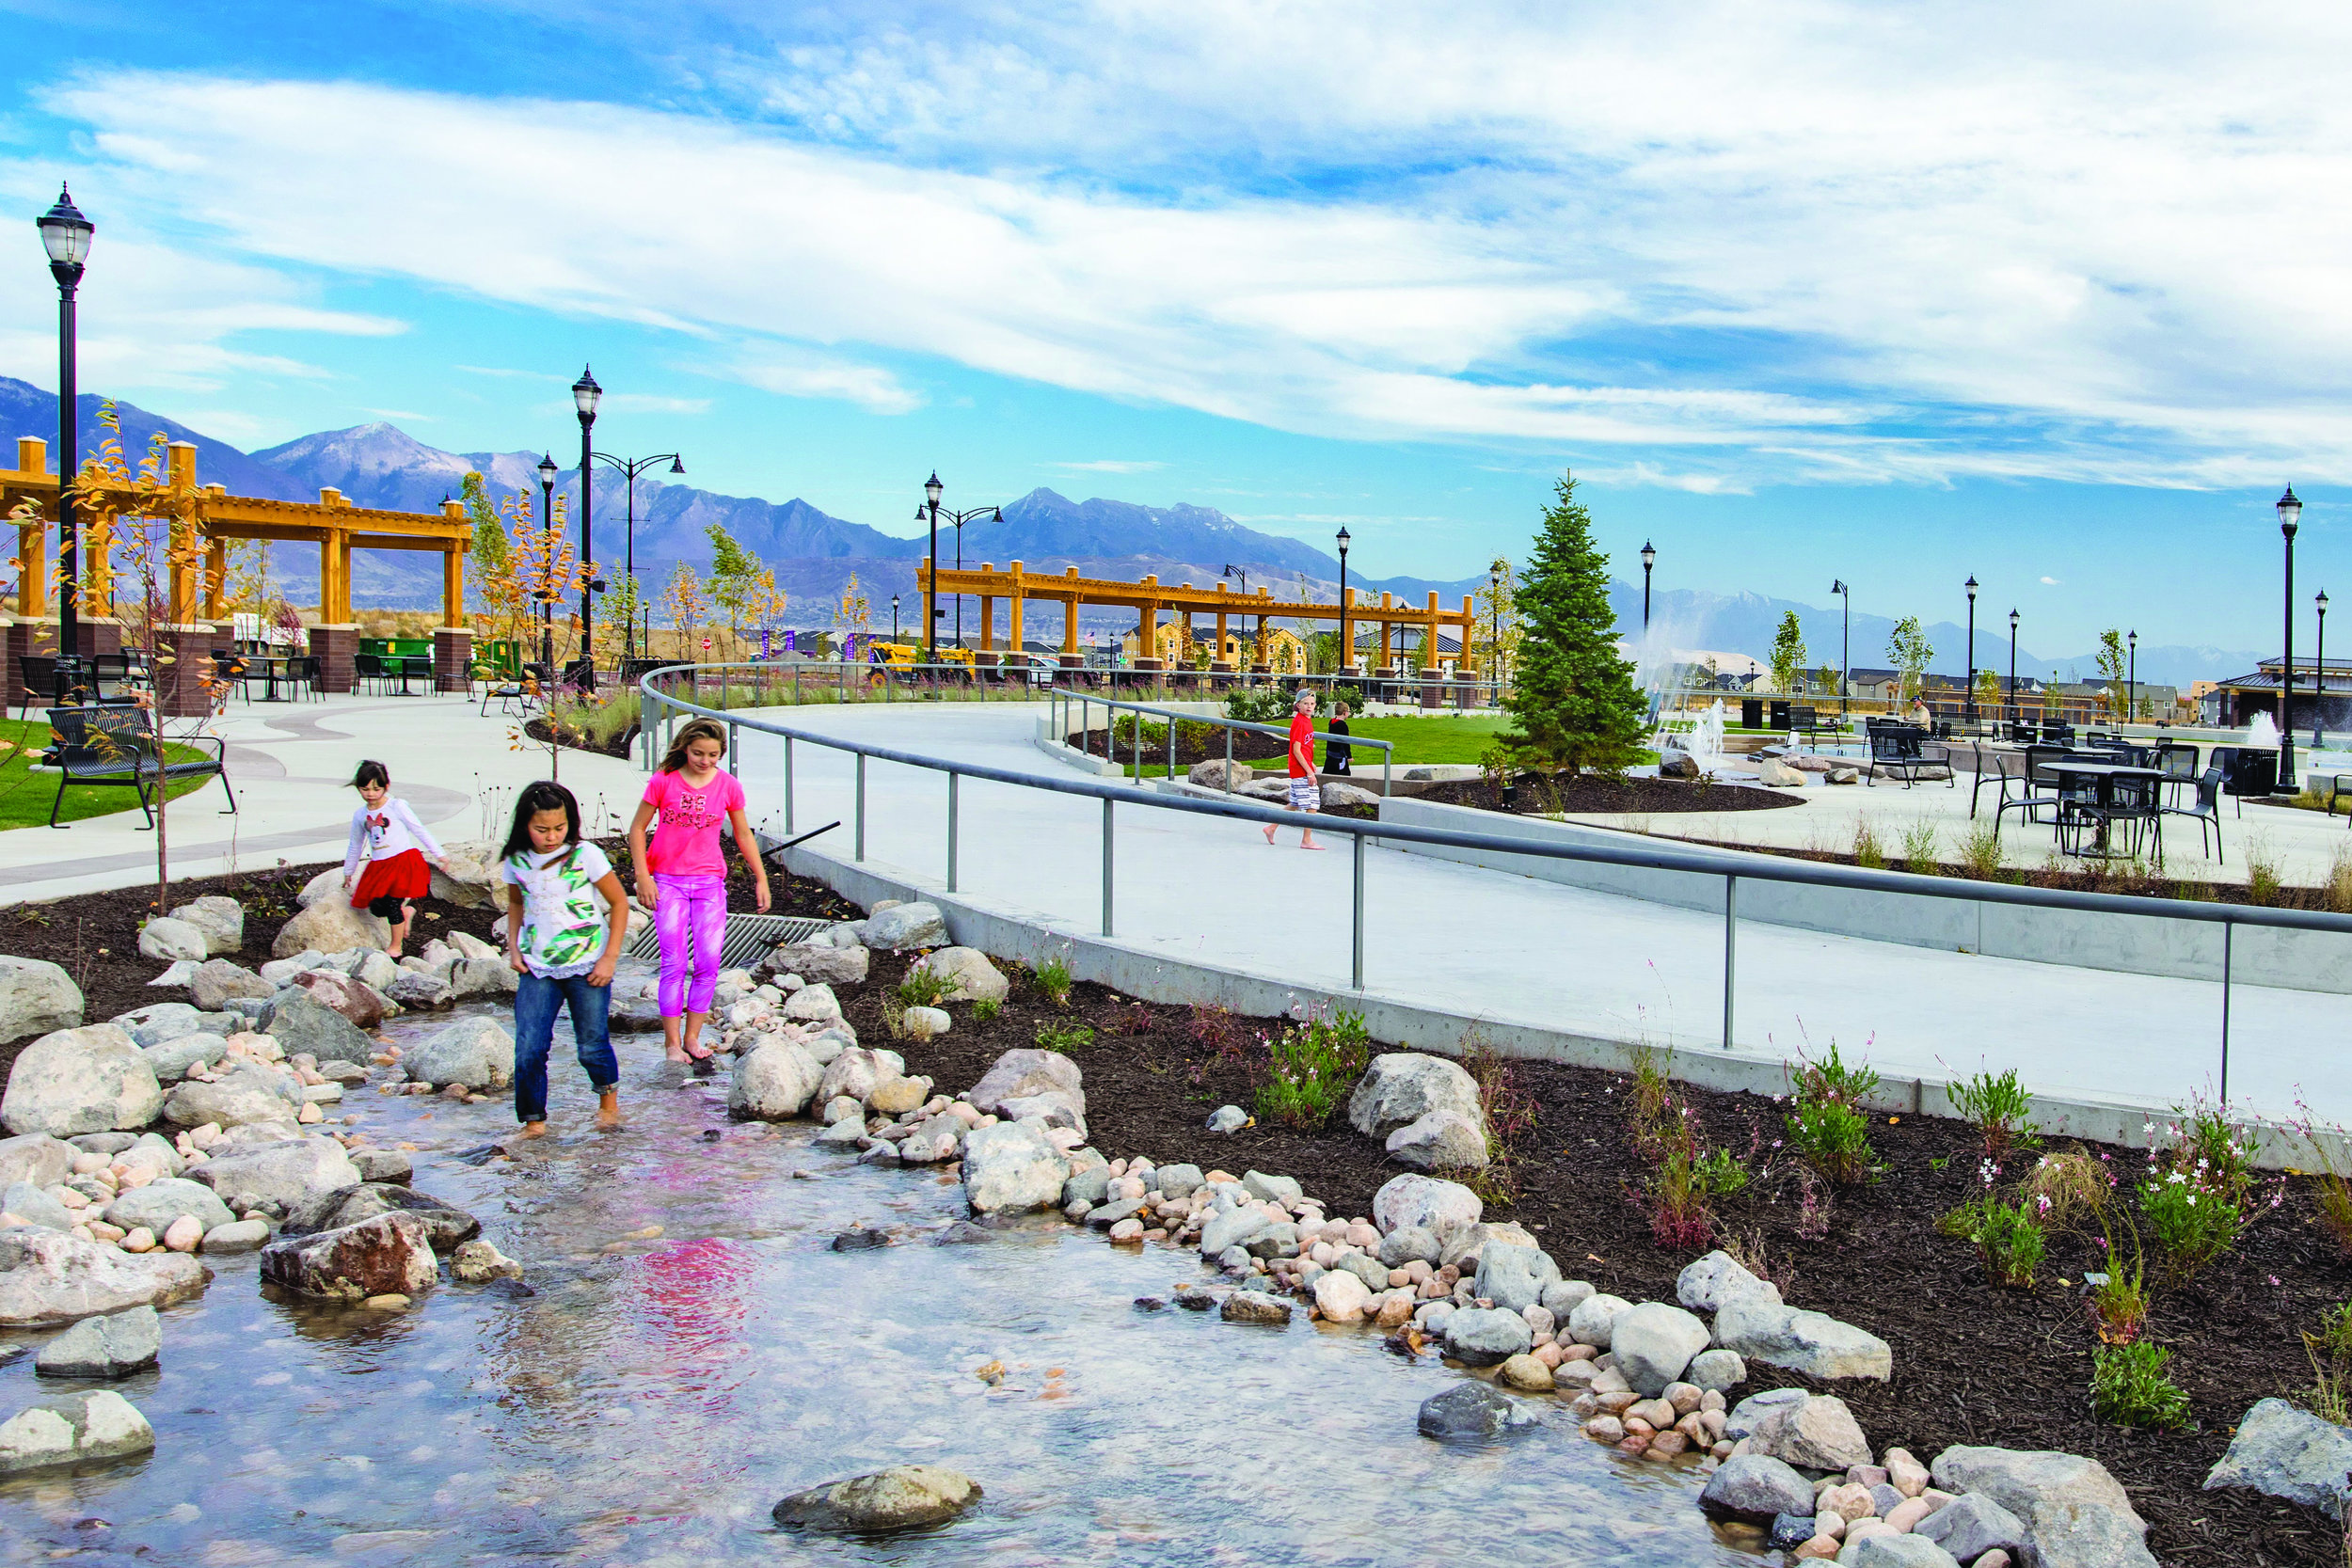  These children are enjoying the Natural Creek water feature segment of the implied meandering creek that runs through the Towne Center. 